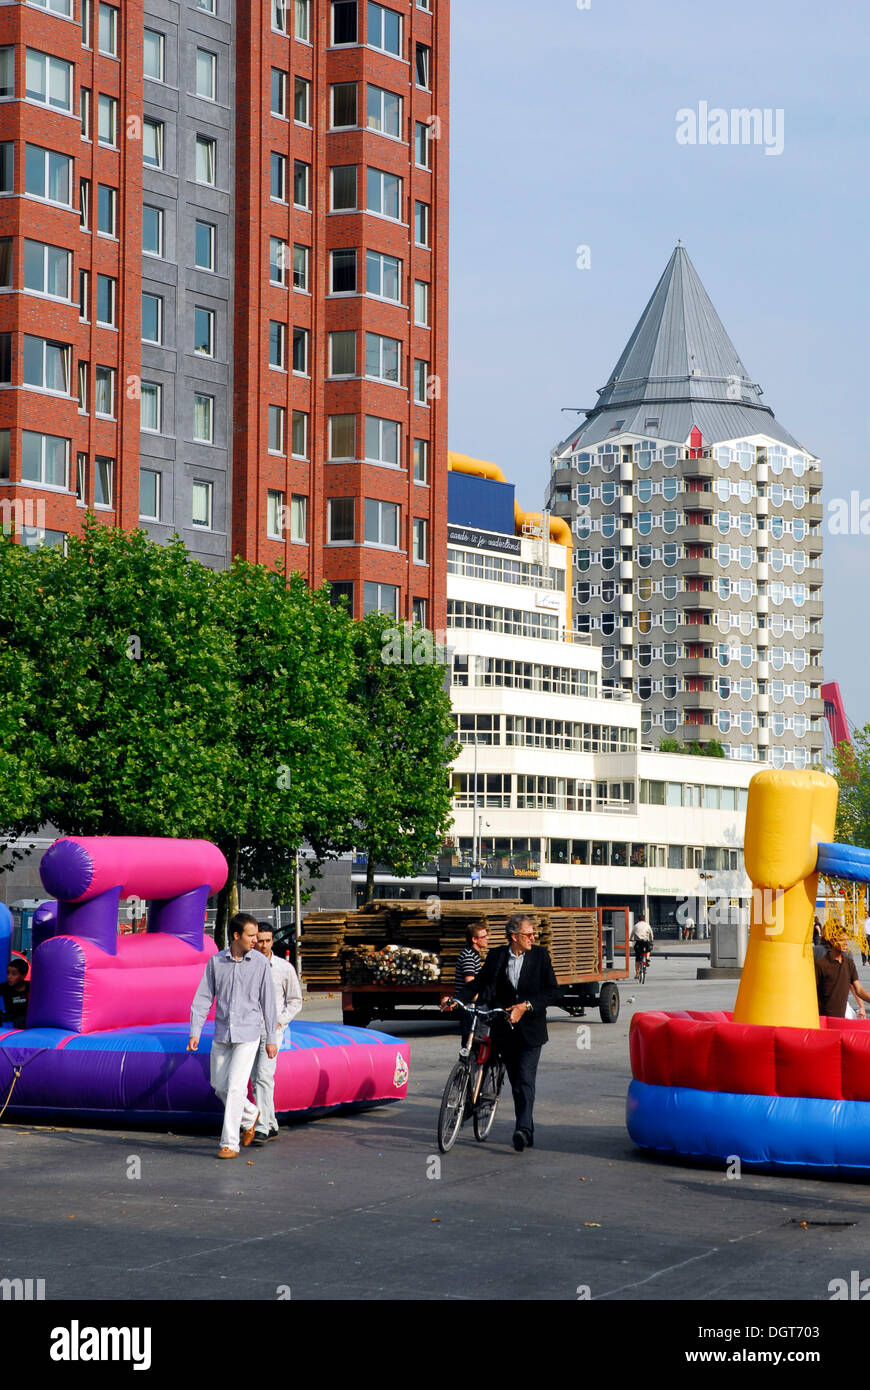 Modern architecture along the Binnenrotte, residence tower Statendam, the public library and the Blaaktoren Tower, Rotterdam Stock Photo